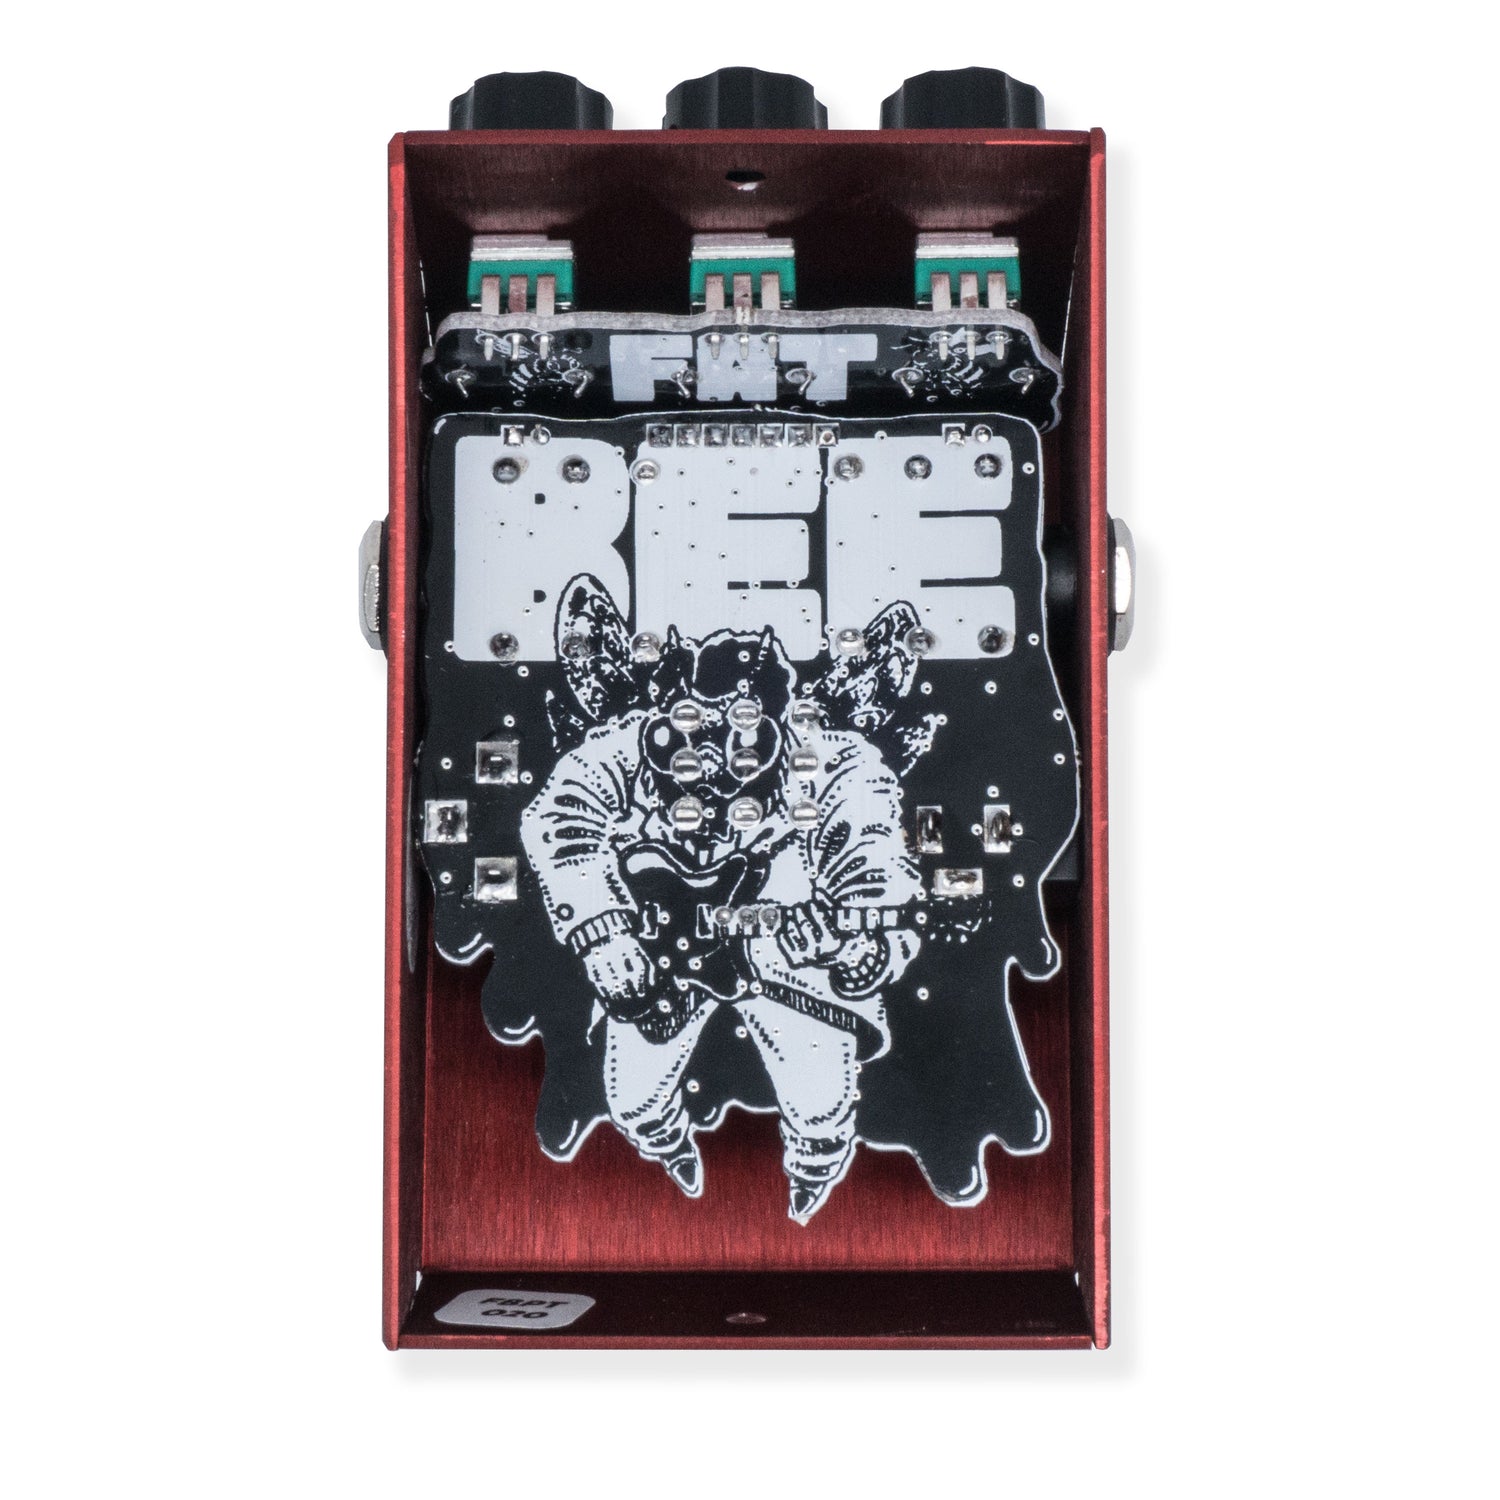 FATBEE Overdrive &lt;p&gt; Limited Edition